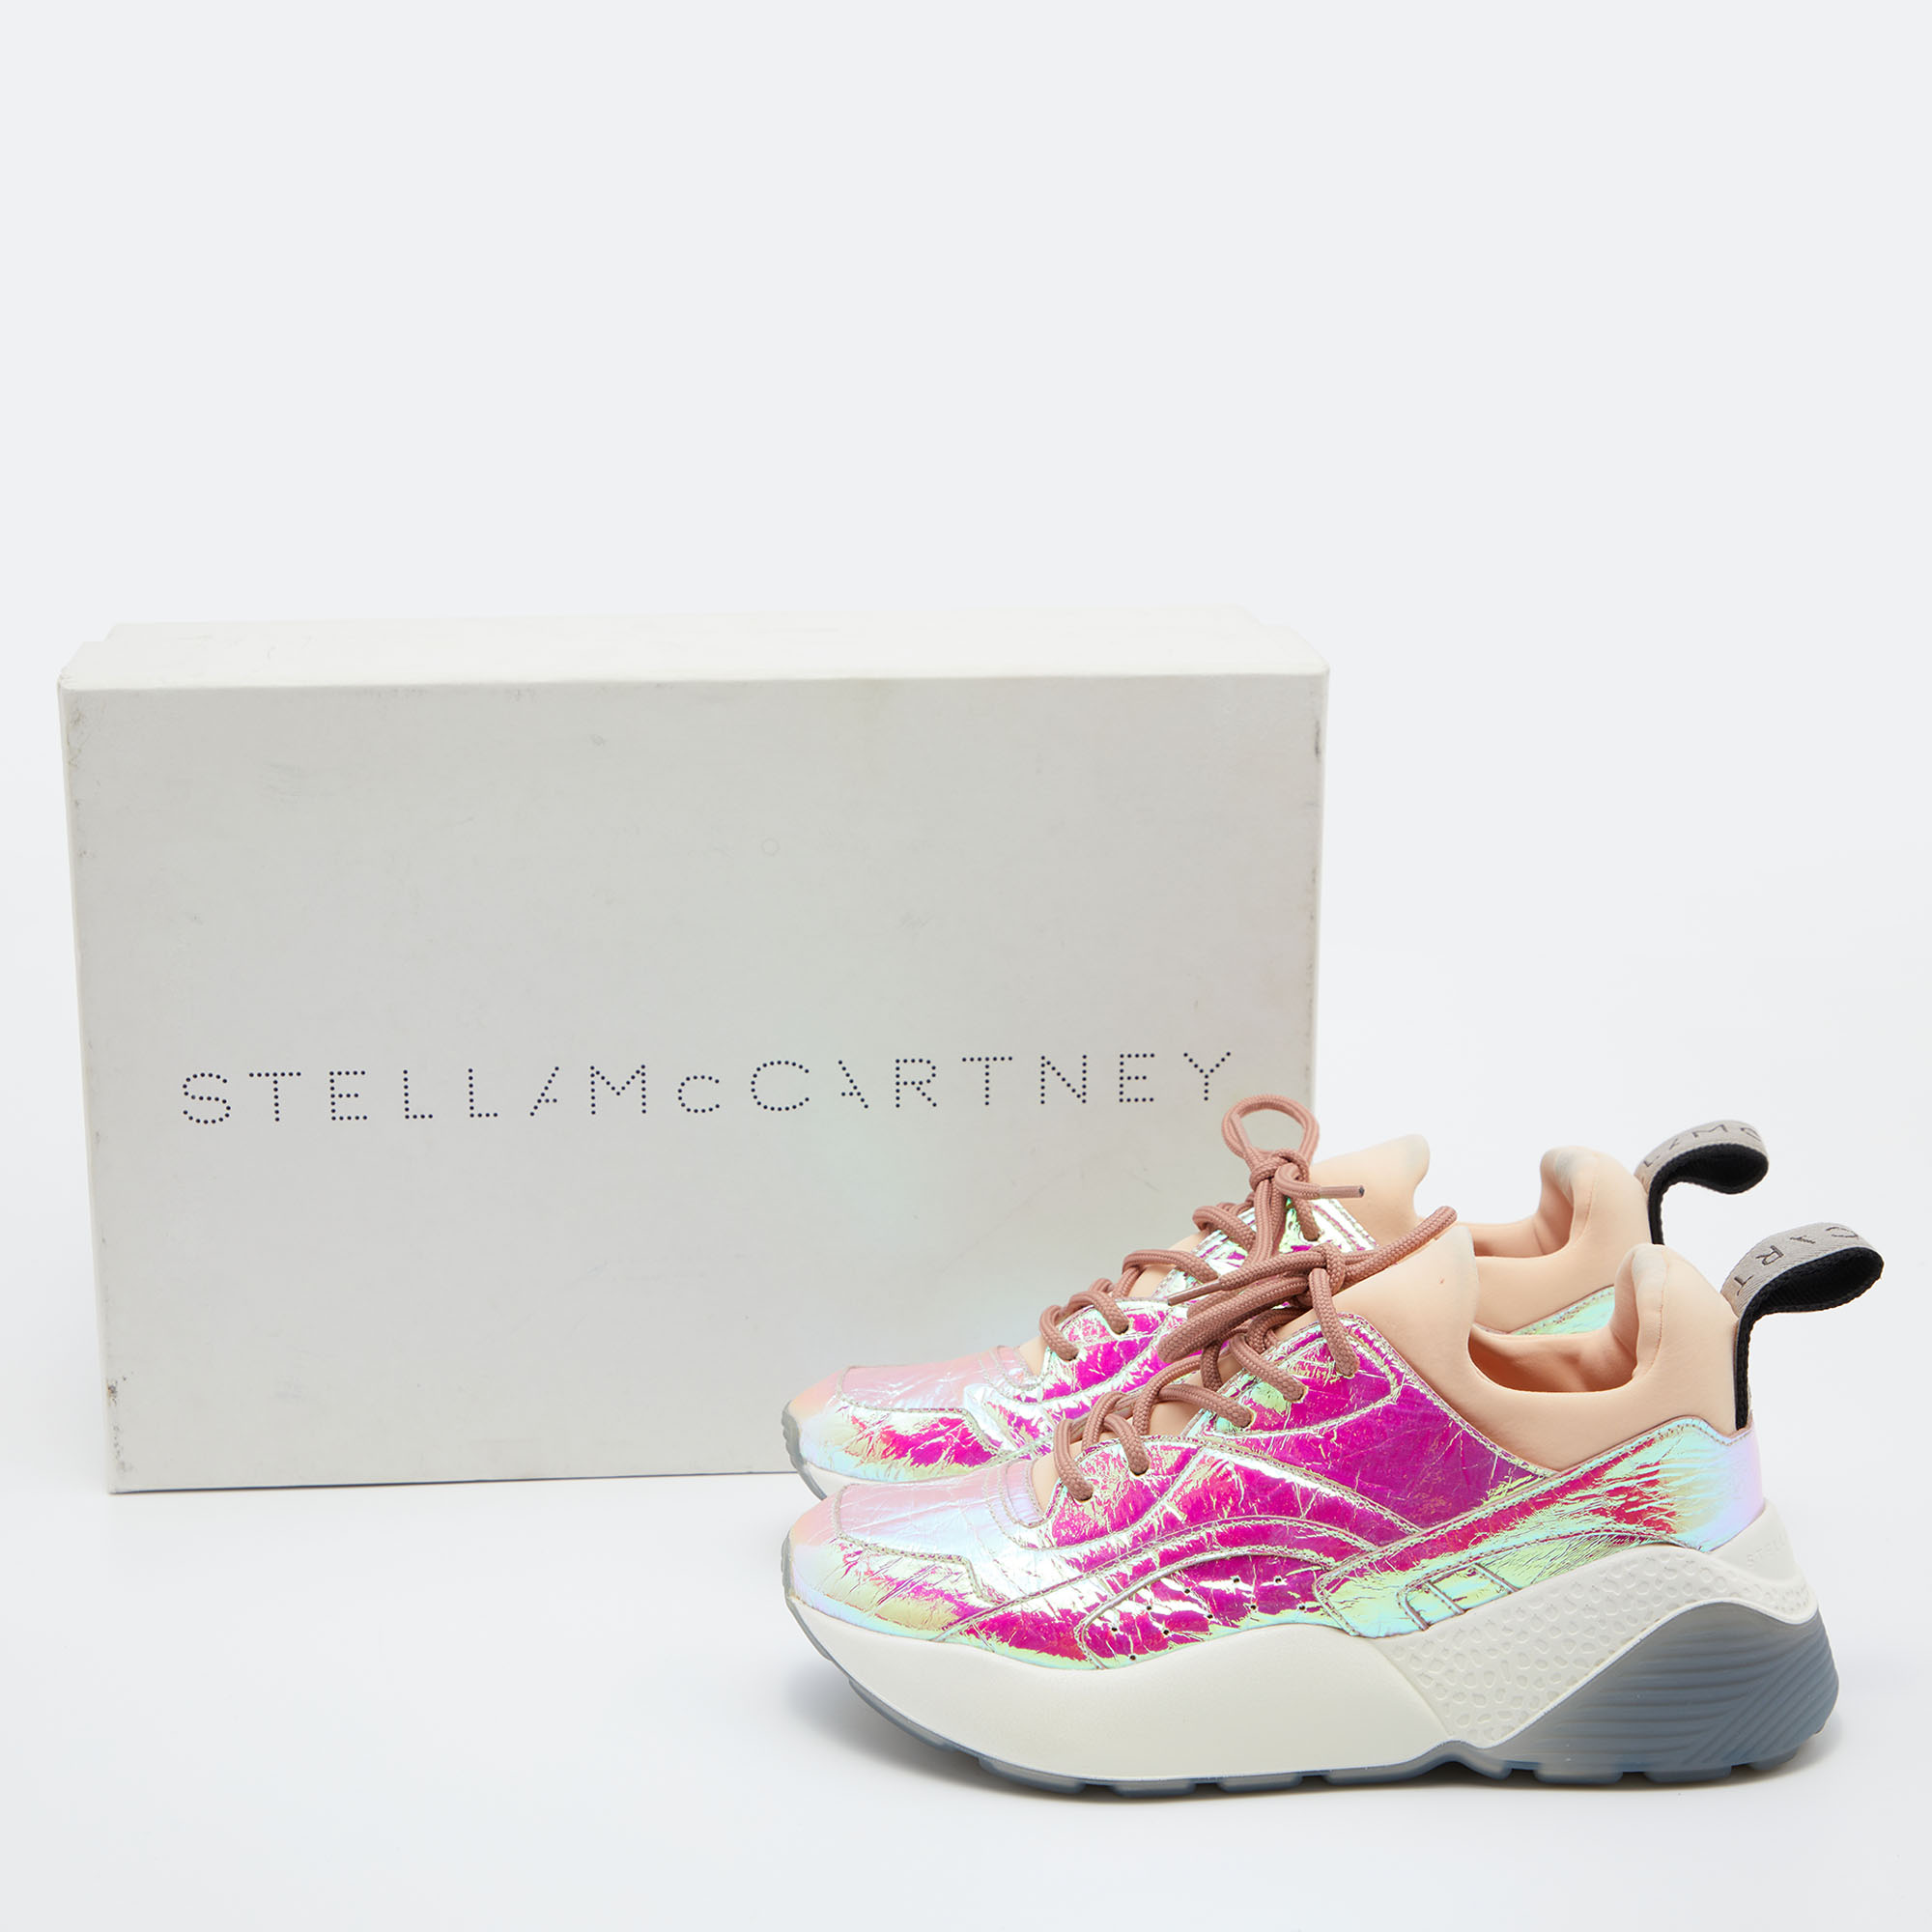 Stella McCartney Multicolor Holographic Faux Leather And Neoprene Sneakers Size 38